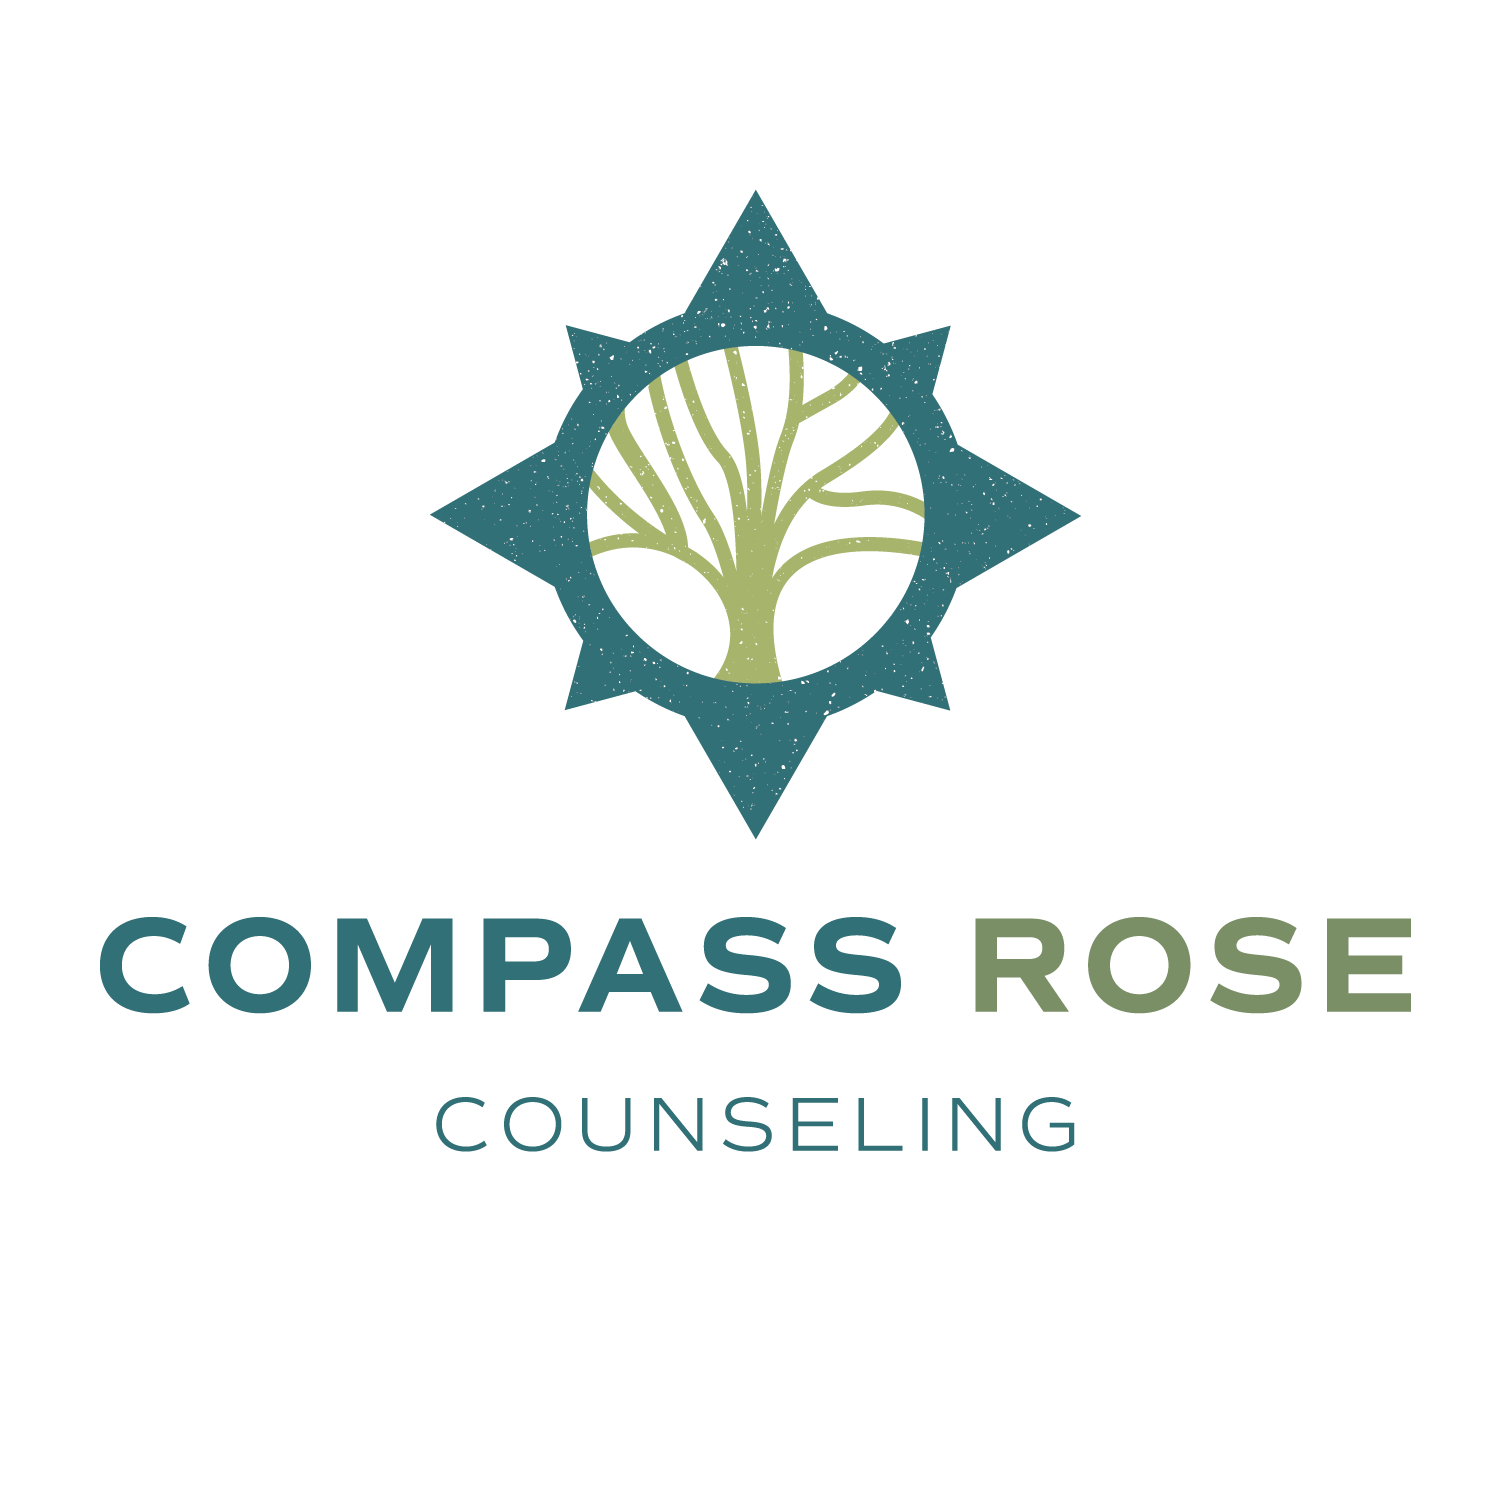 Compass Rose Counseling